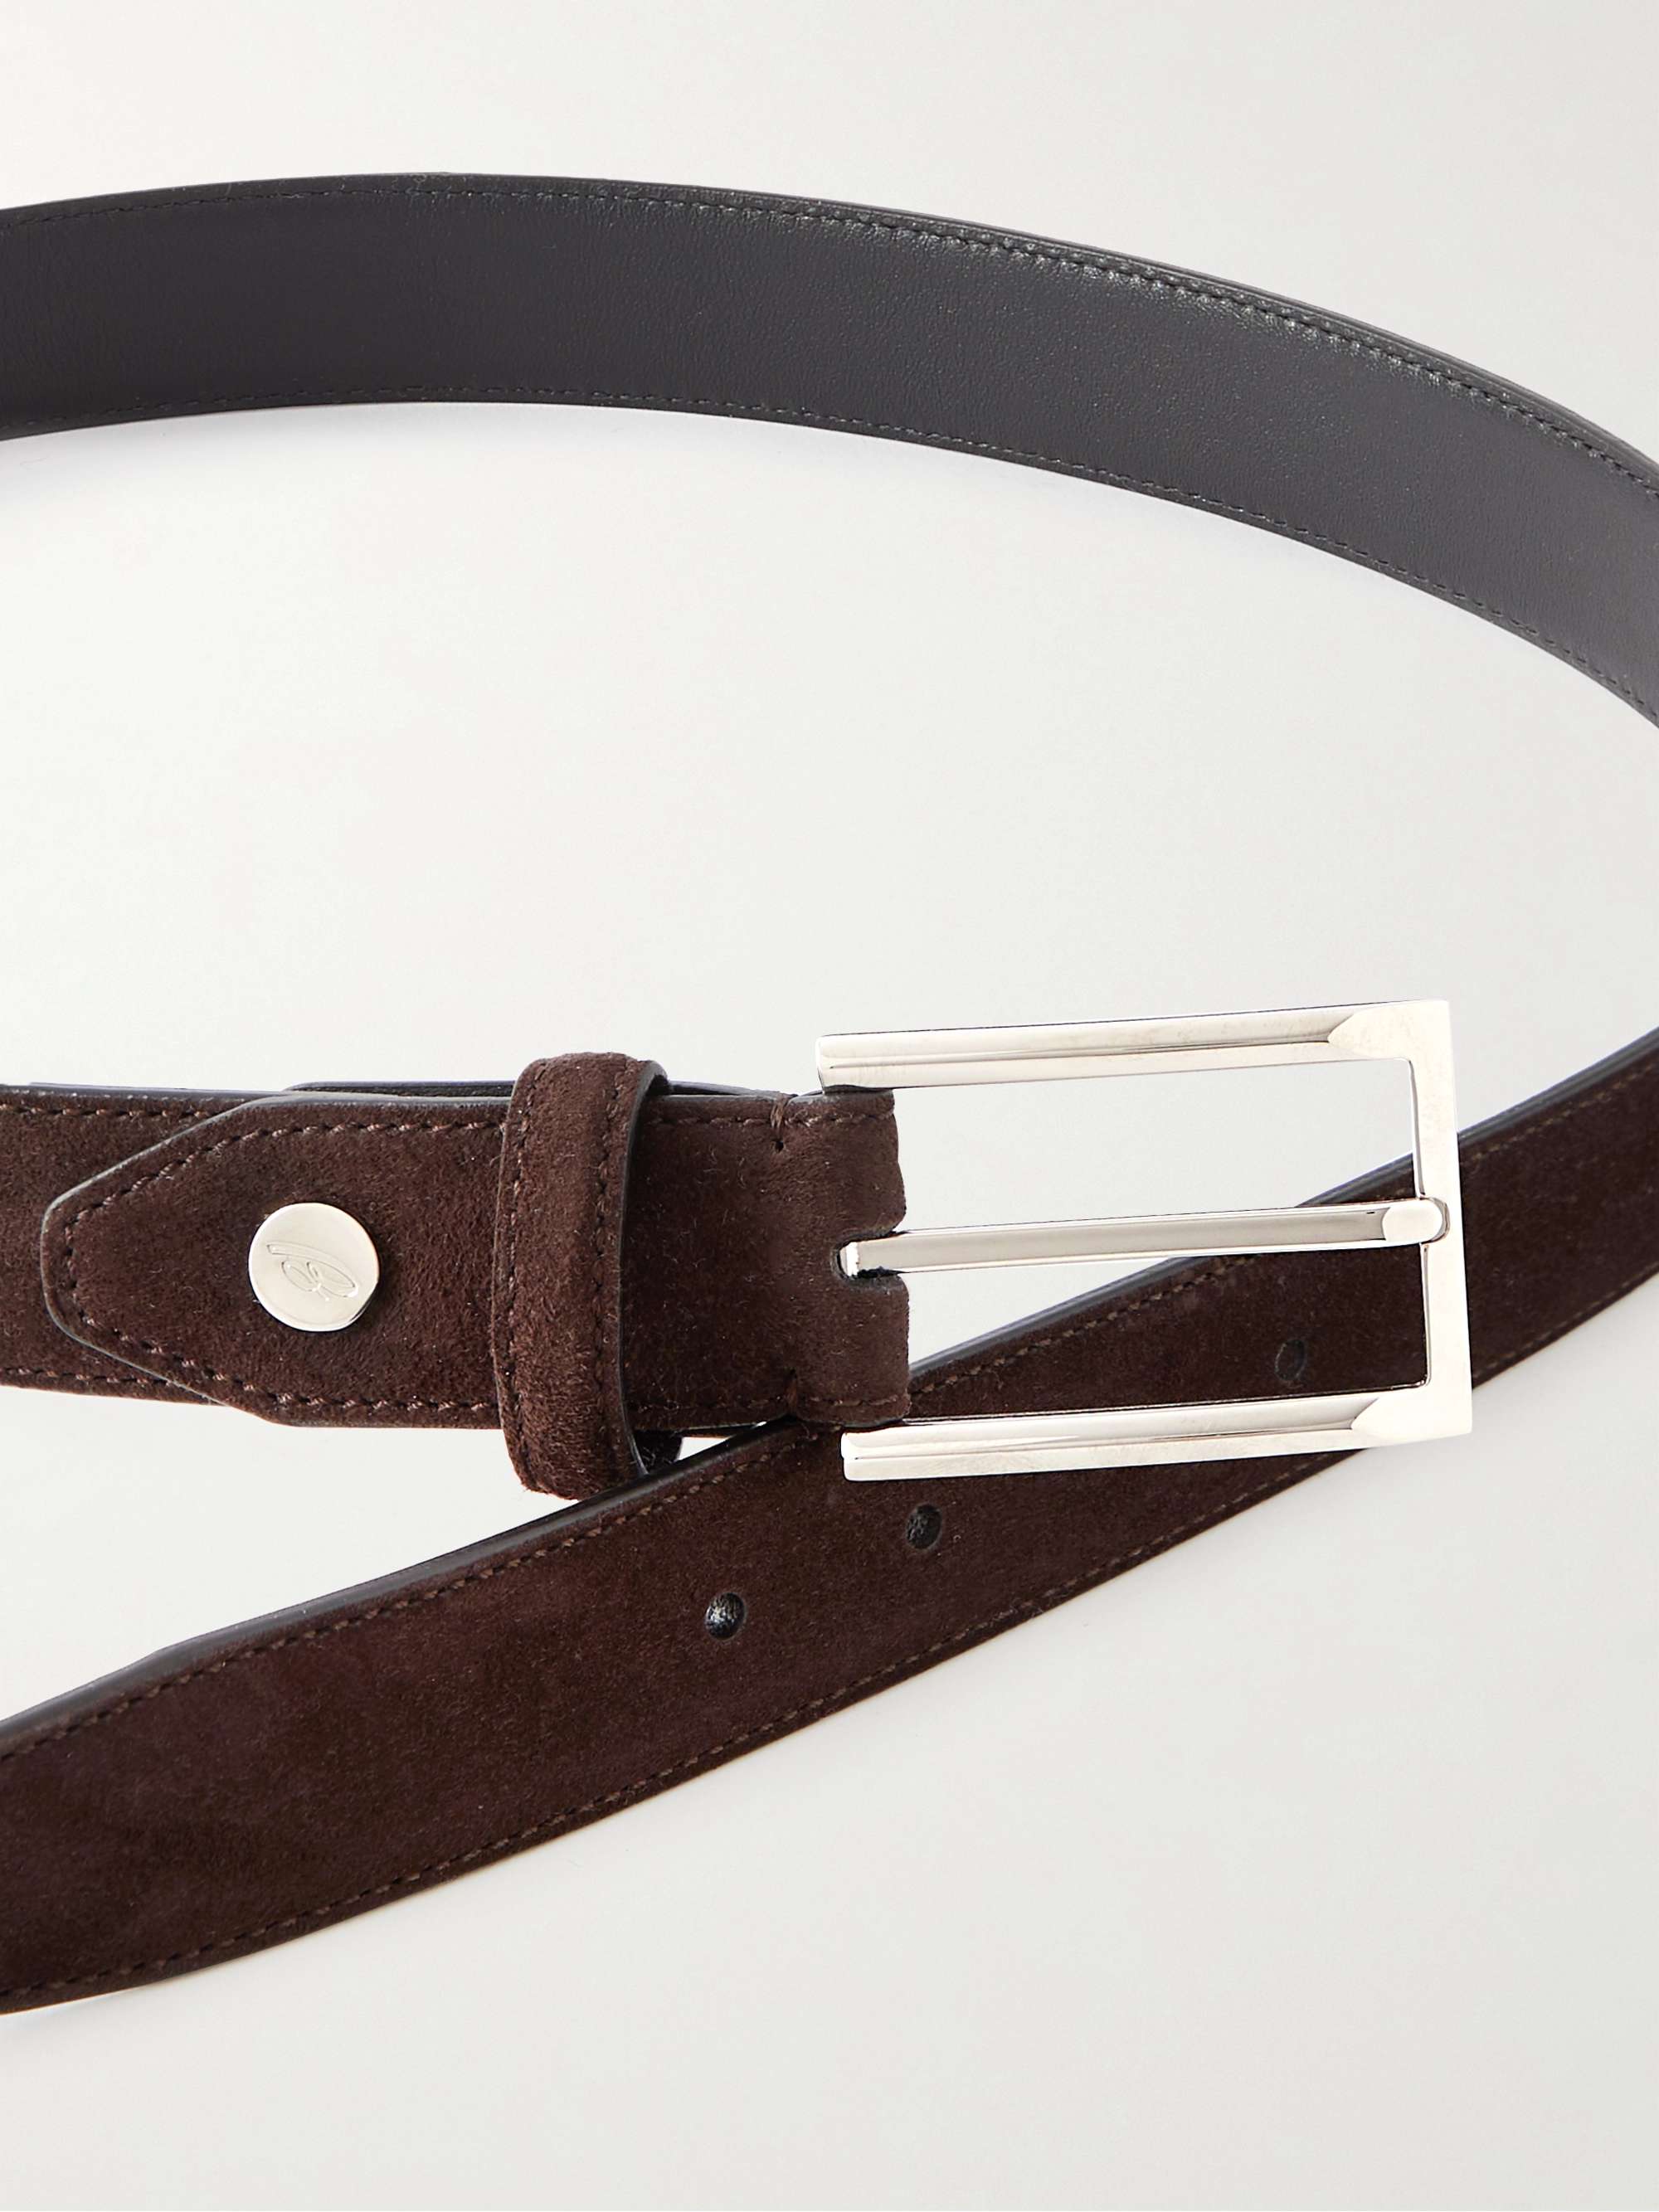 BRIONI 3cm Reversible Leather and Suede Belt